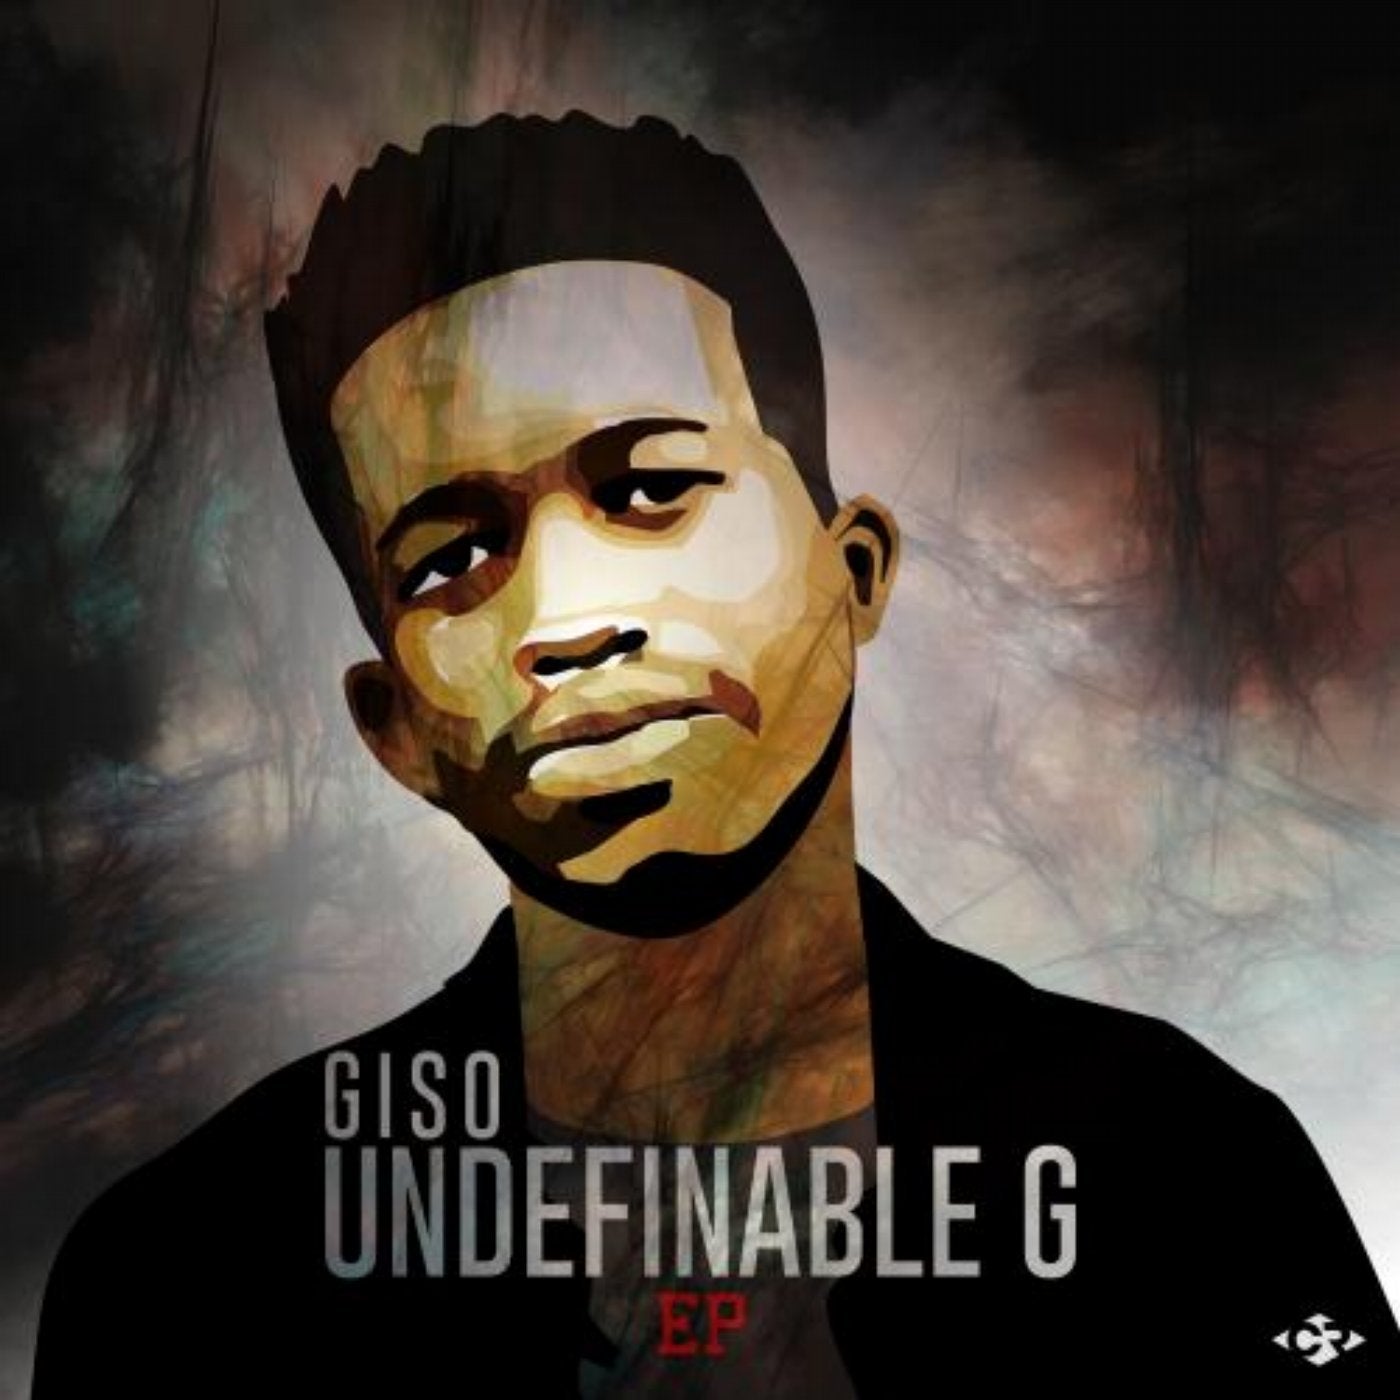 Undefinable G EP